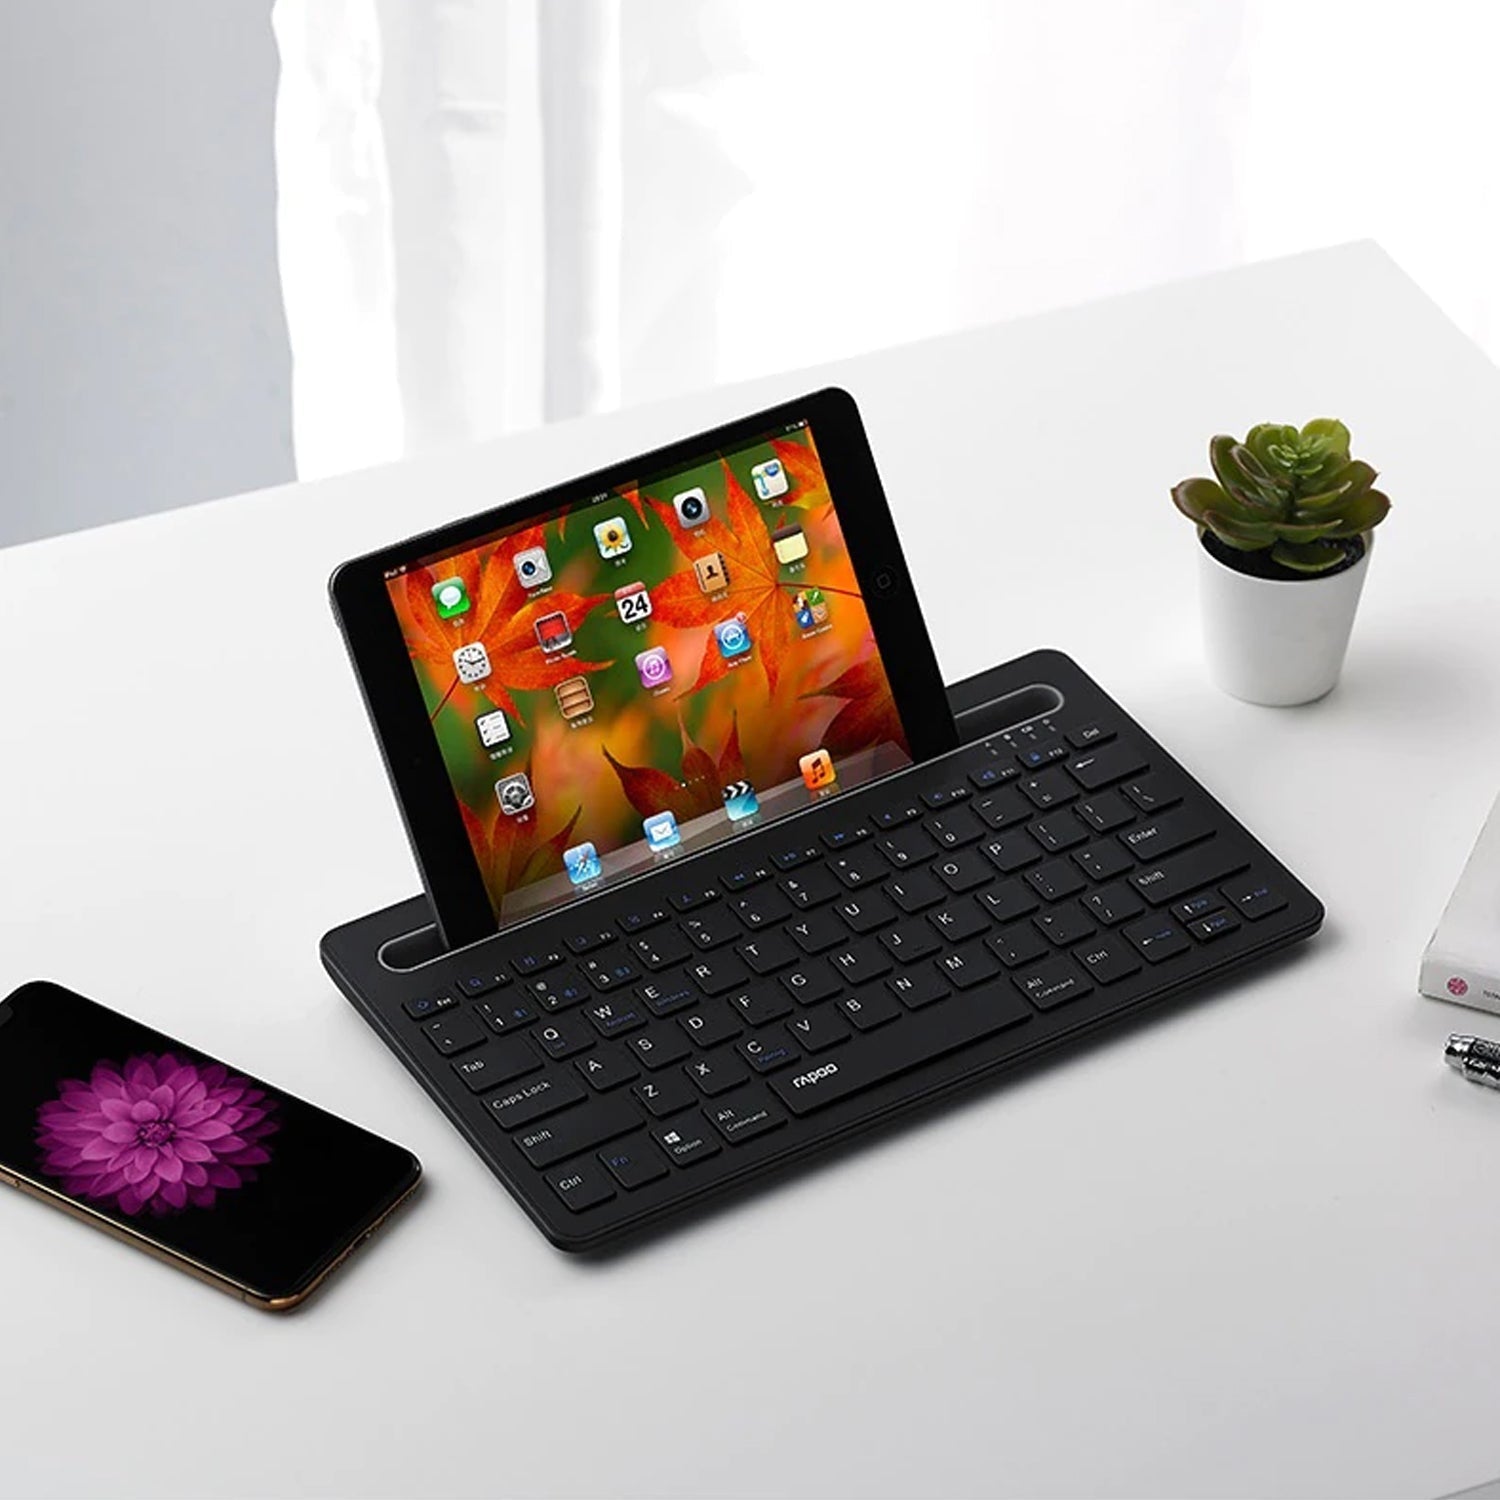 6079 Wireless Mini Keyboard for PC, tablet and phones to control them remotely. 